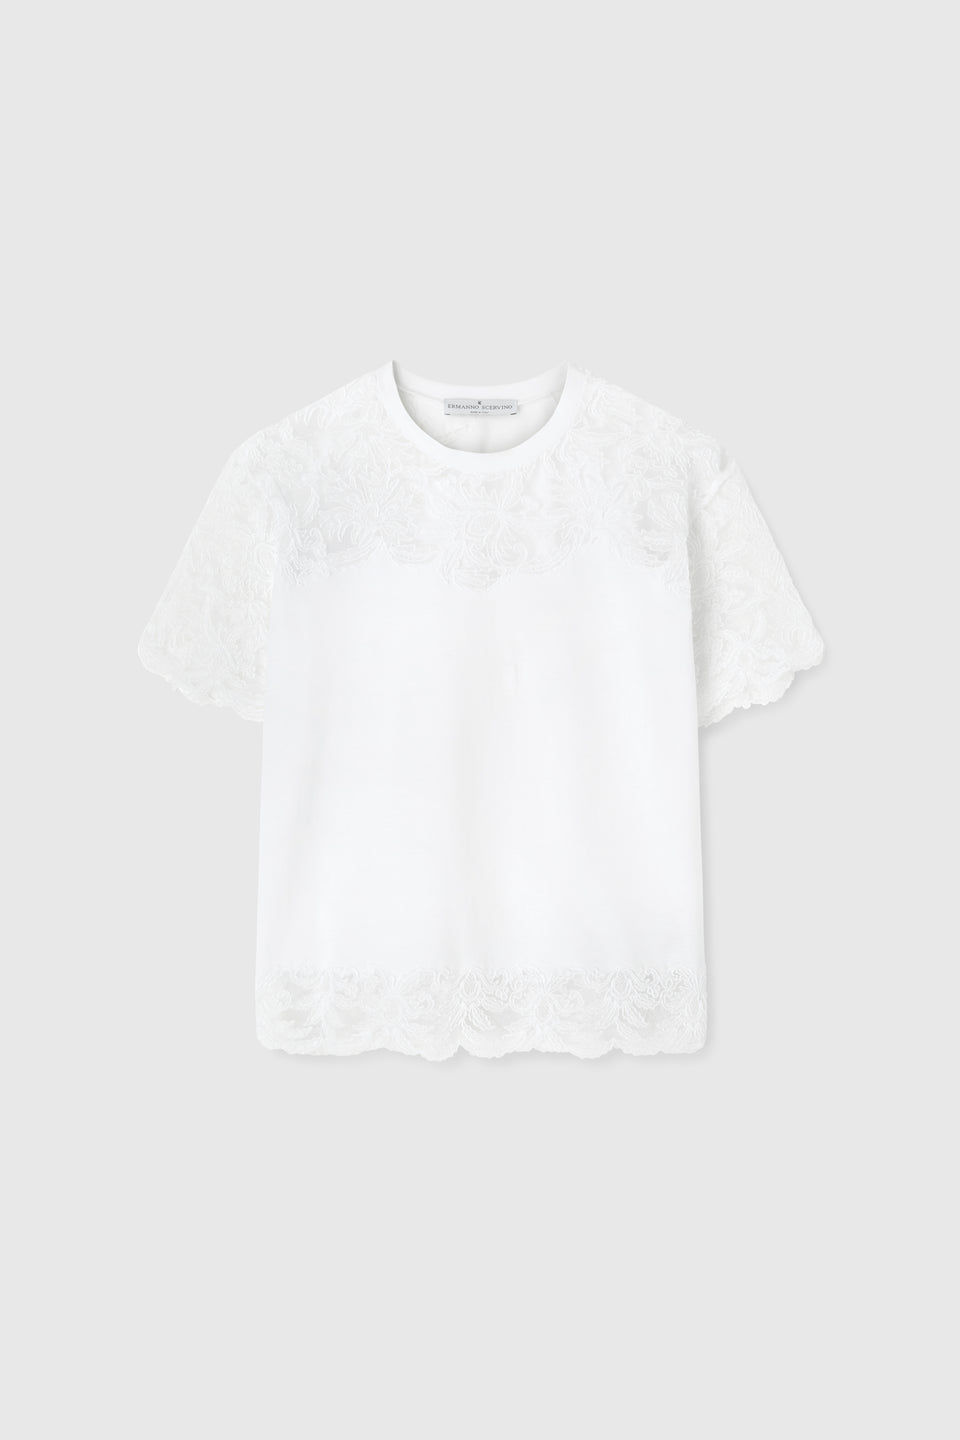 White cotton and lace T-shirt